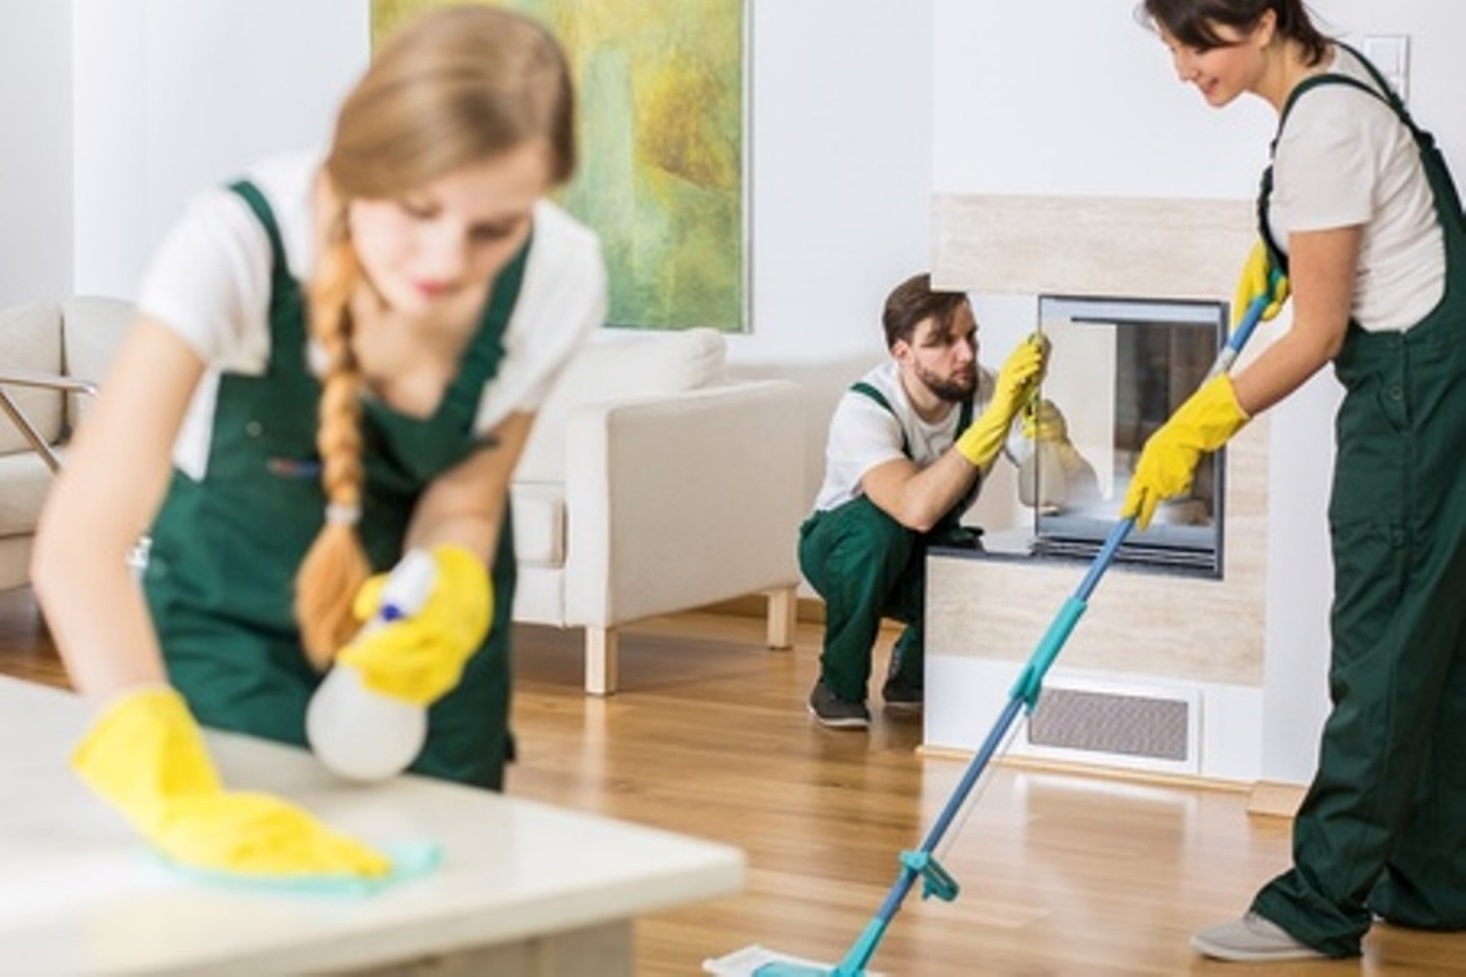 Home House Cleaning Service in Omaha NE , Office Cleaning Service in Omaha NE